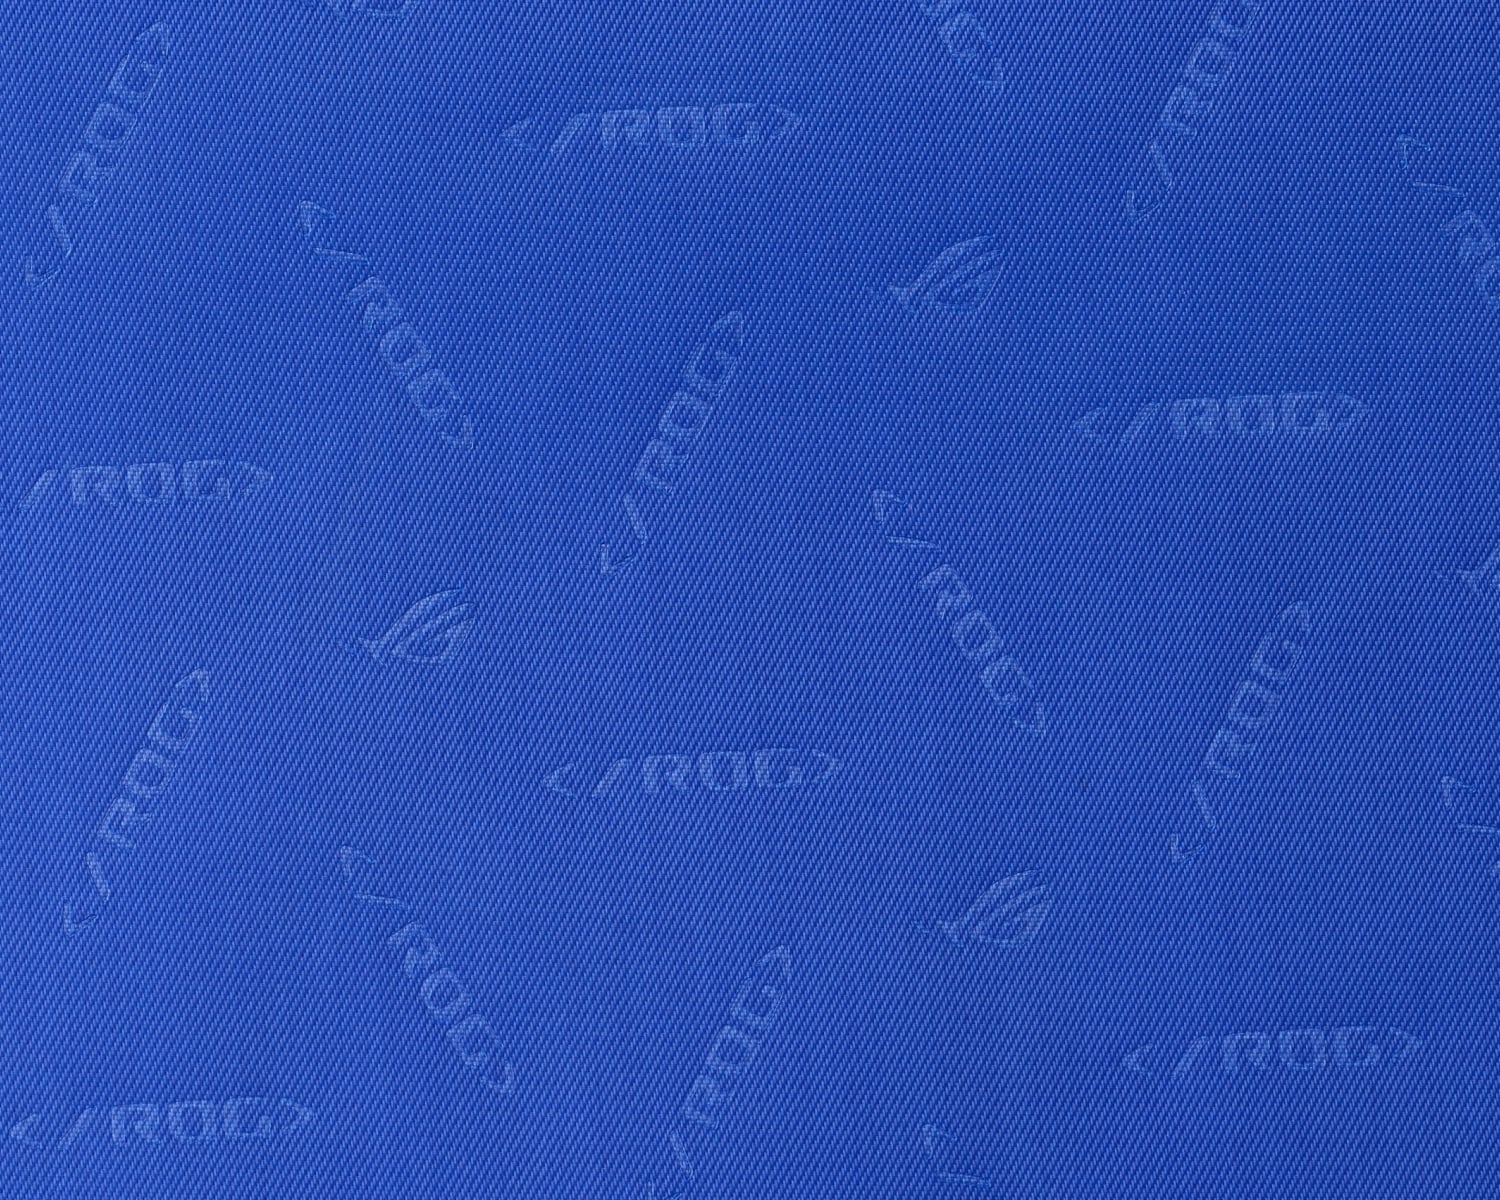 Extreme close-up of the word "</ROG>" and the ROG logo on the interior stitching of the ROG SLASH Duffle Bag